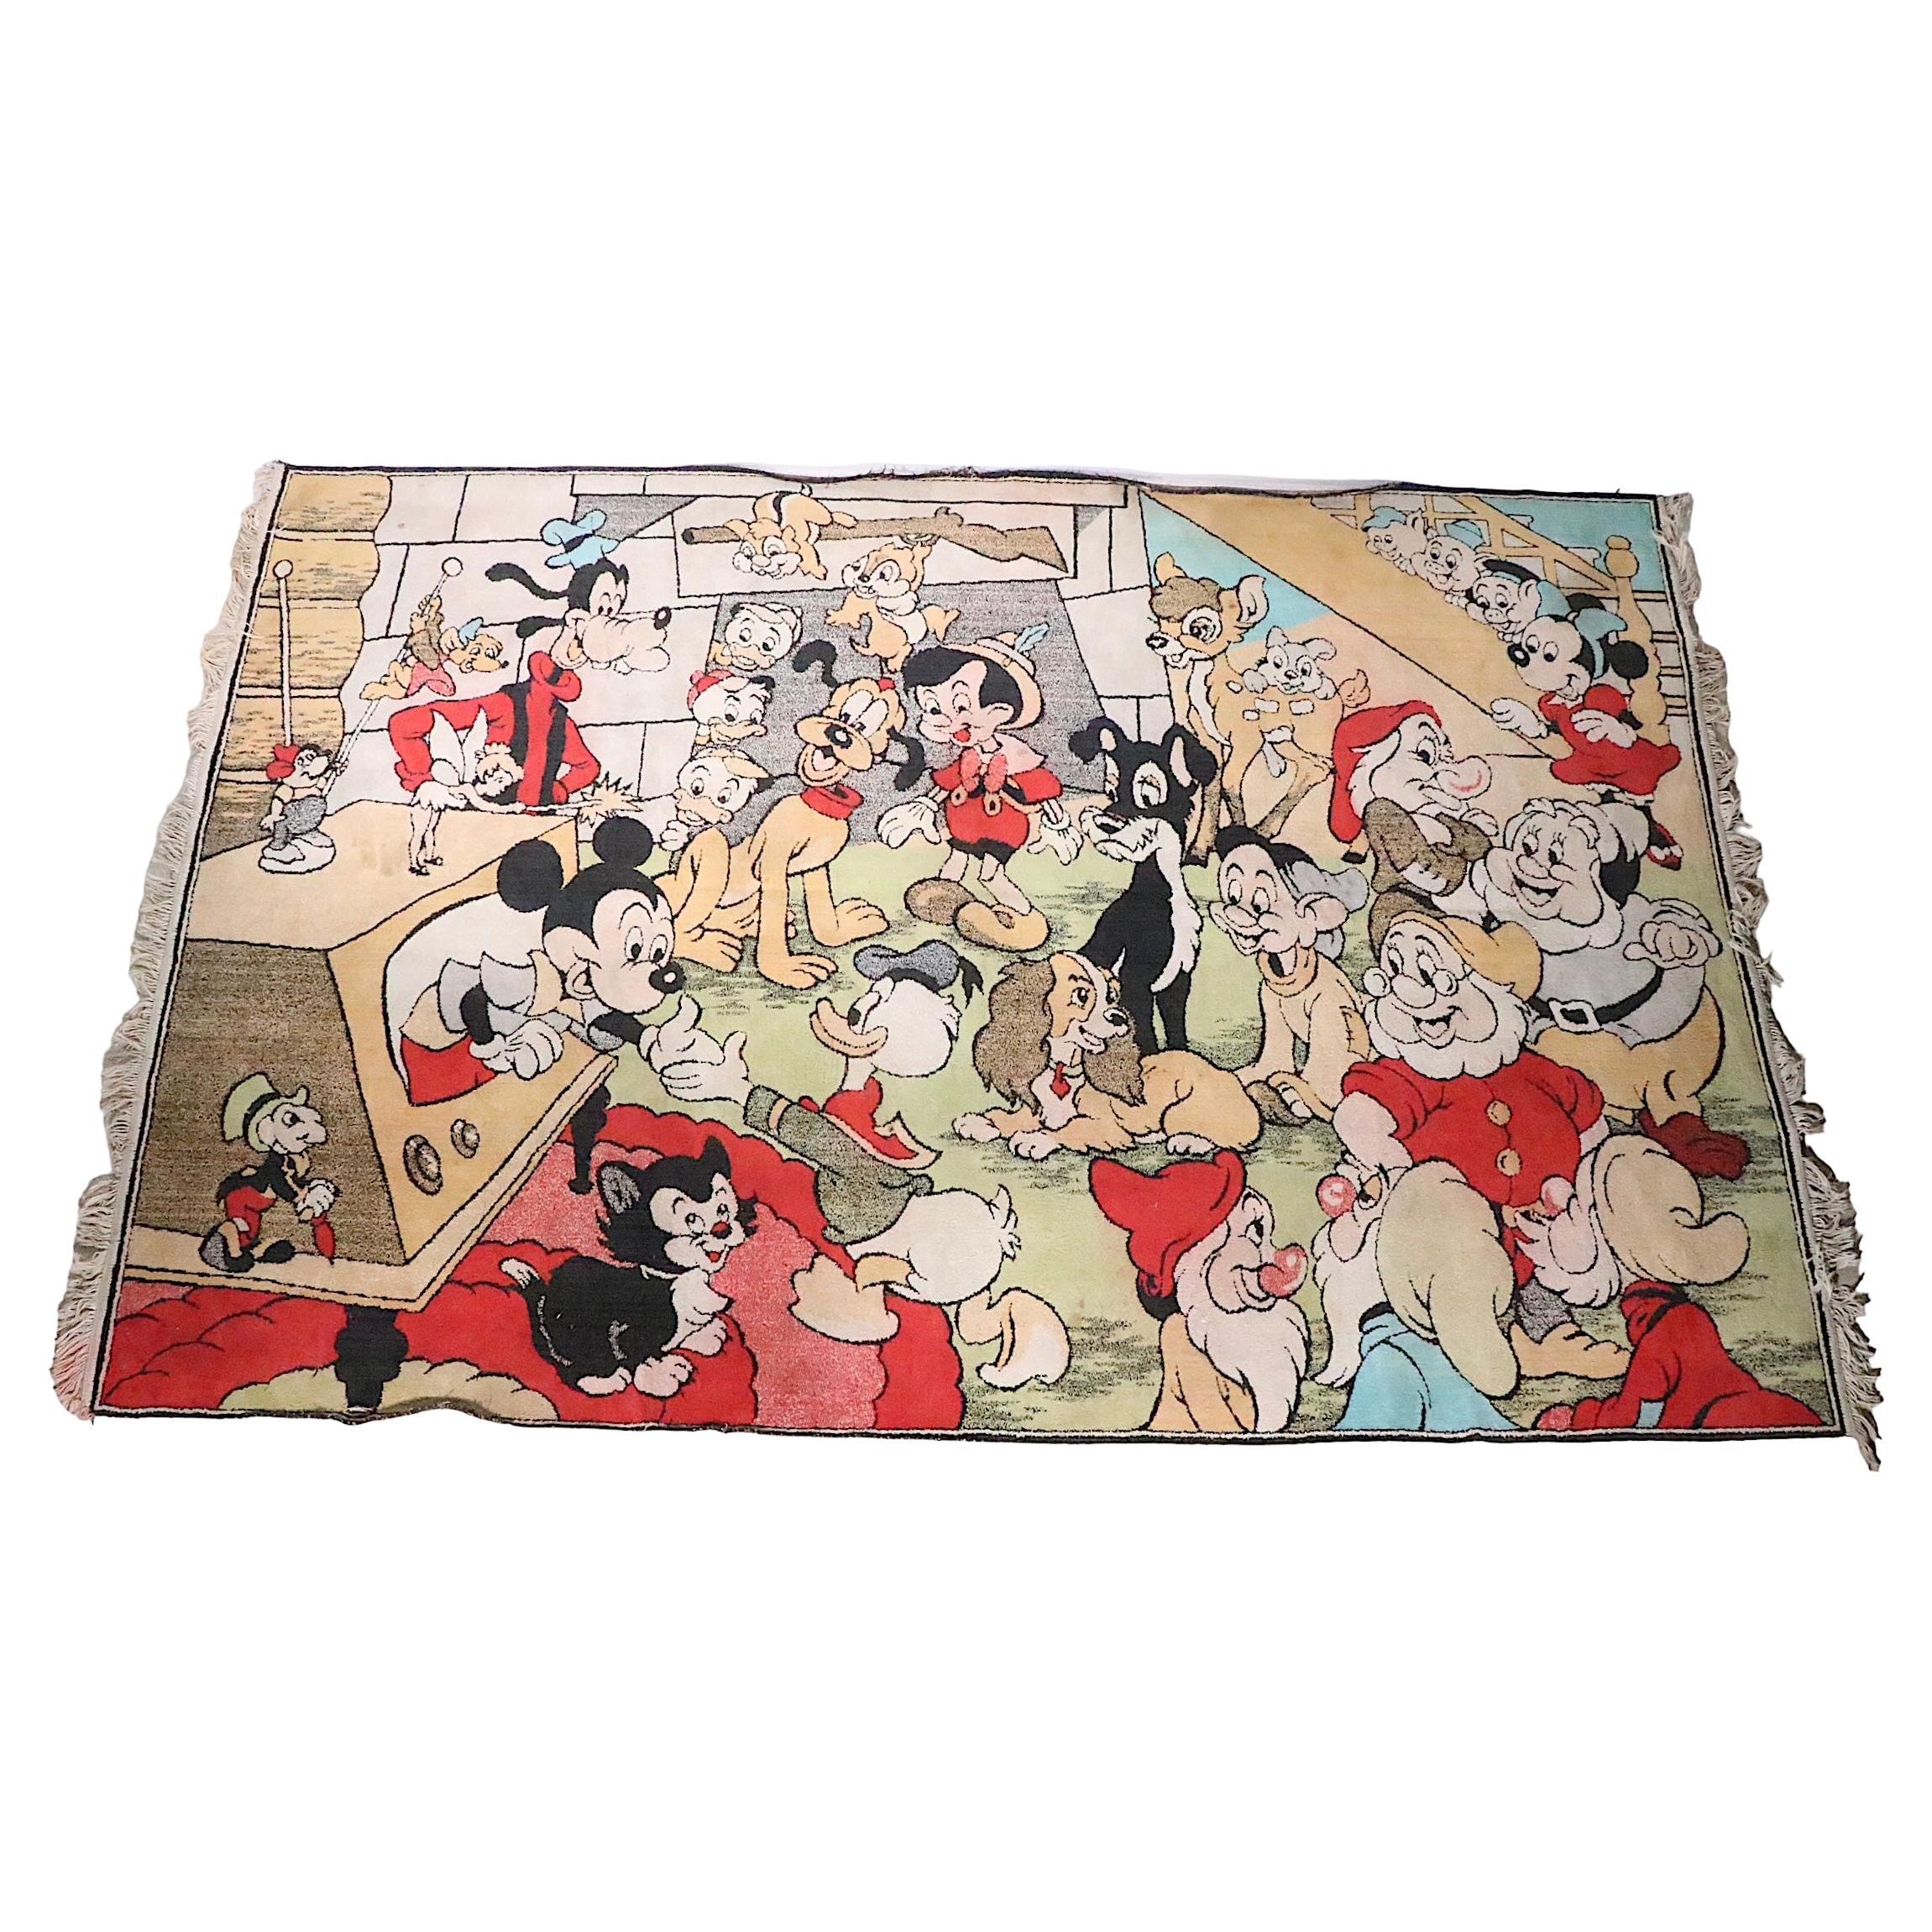 Vintage Disney Character Play Pen Rug c 1960's Mickey Mouse Donald Duck etc.